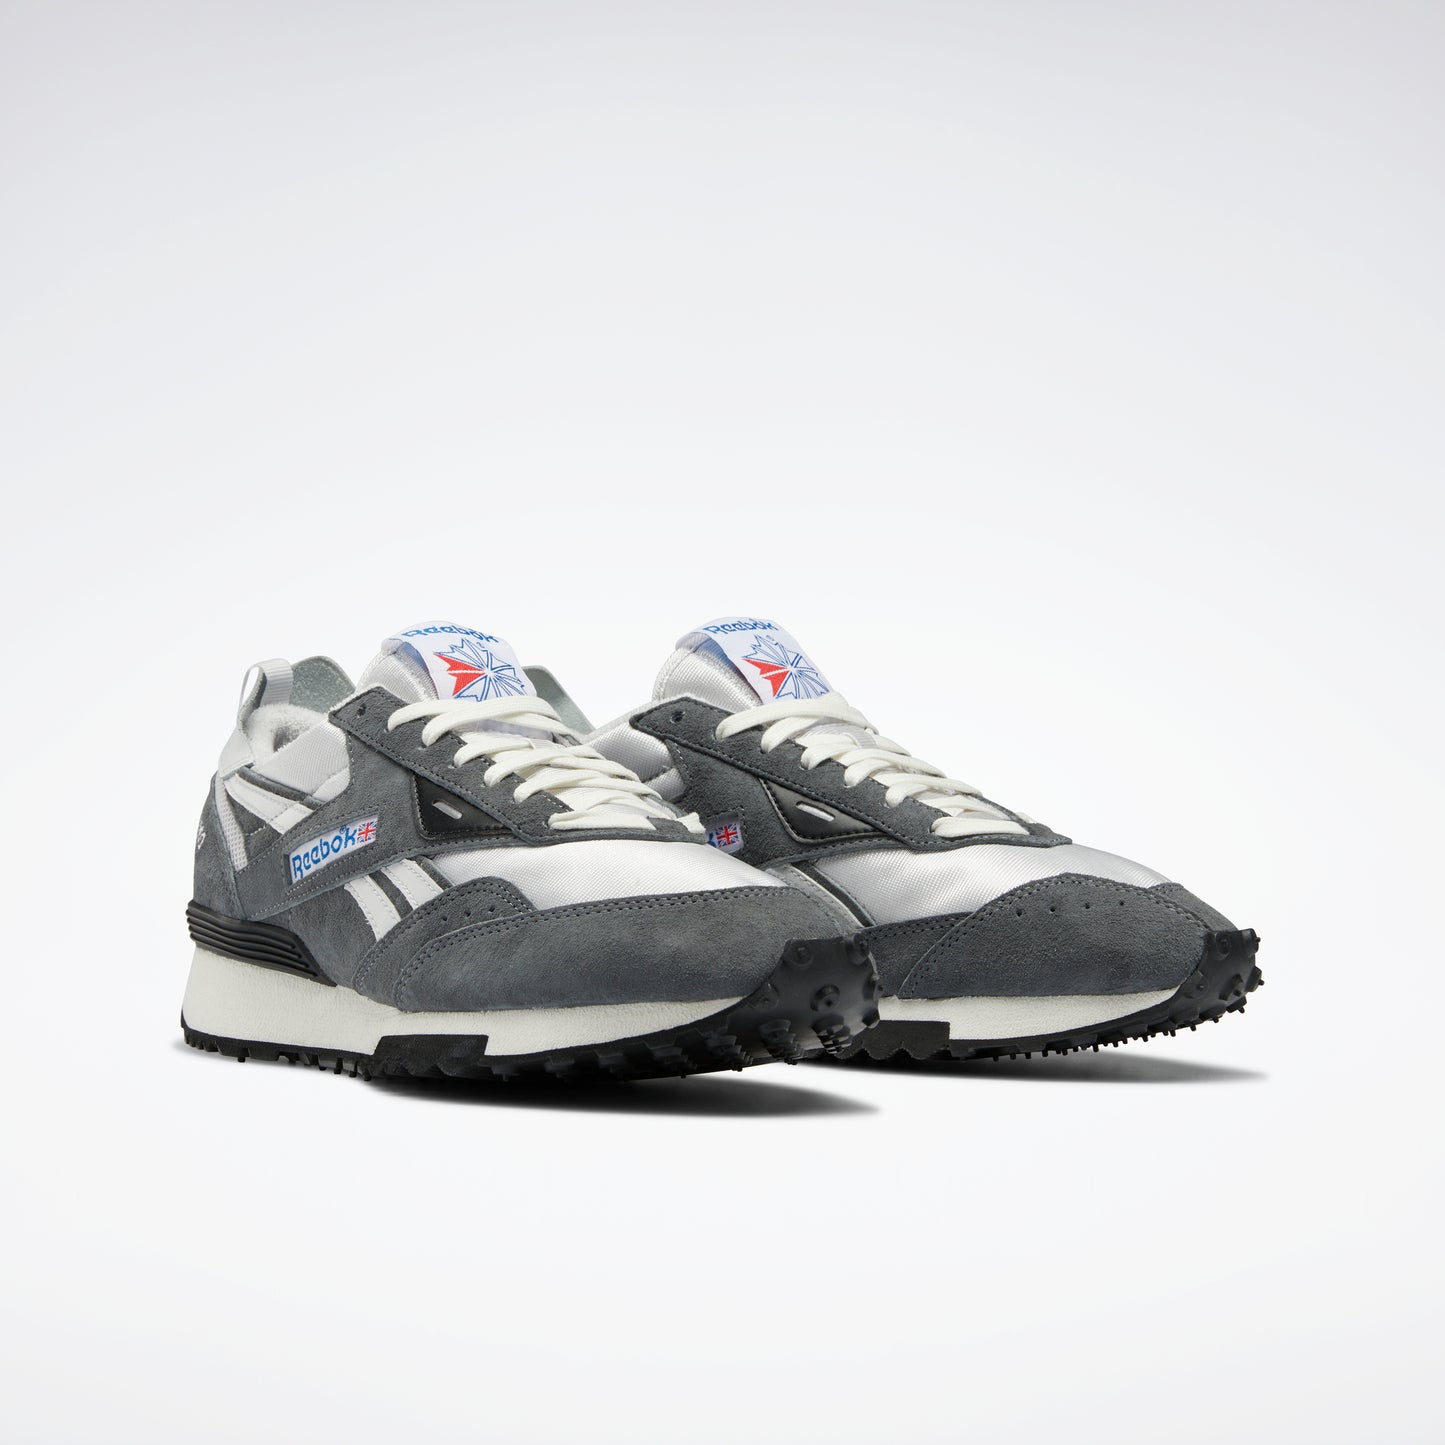 Reebok Footwear Men Lx2200 Shoes Cdgry6/Clgry1/Cblack